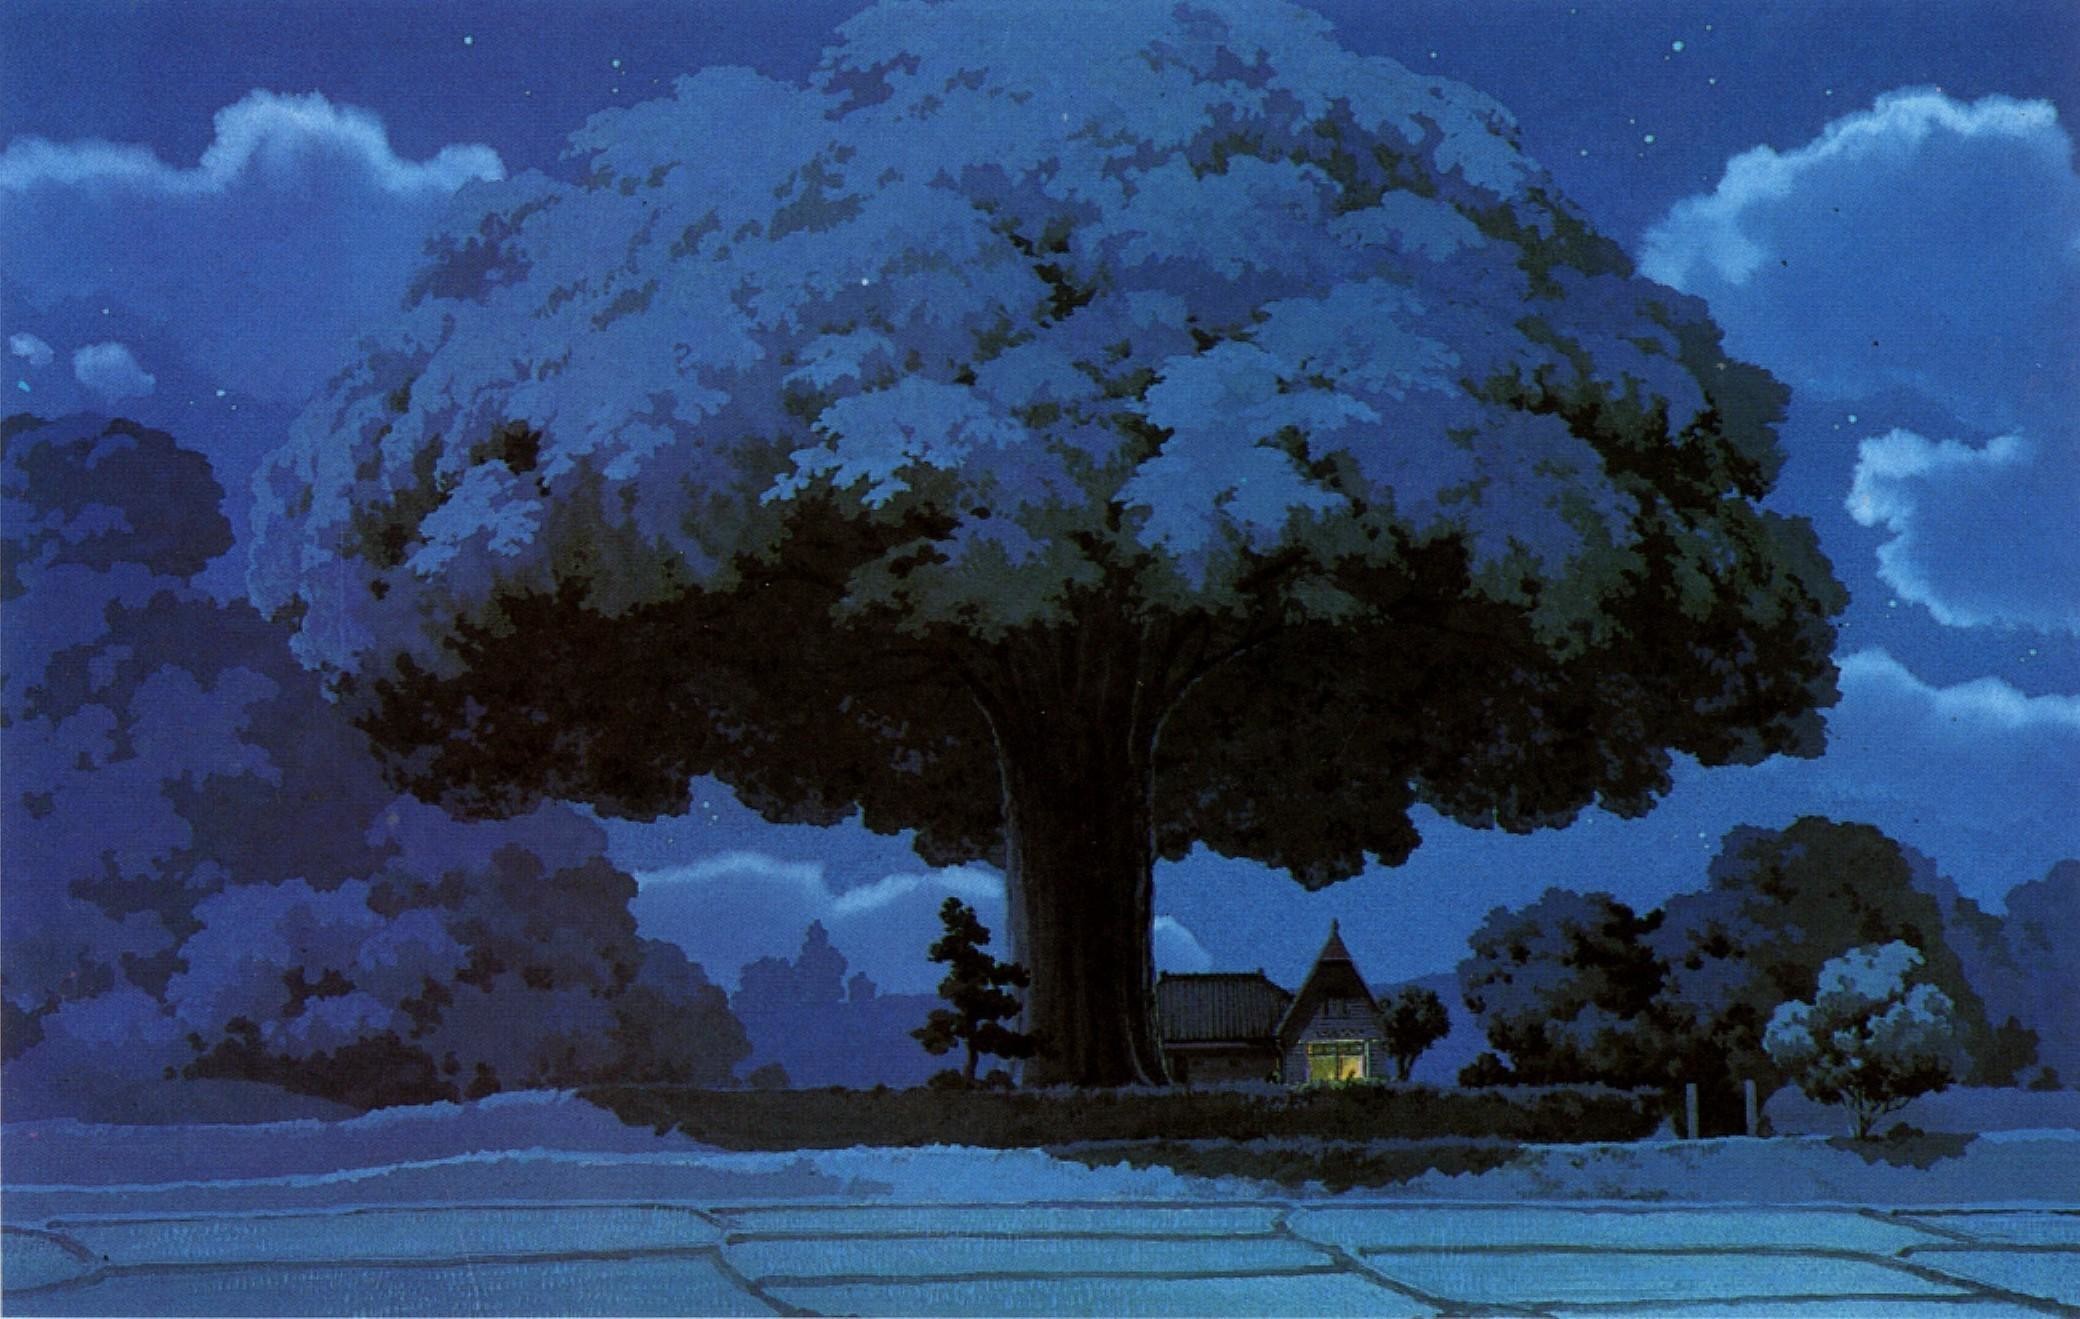 Ghibli Wallpapers (71+ pictures)